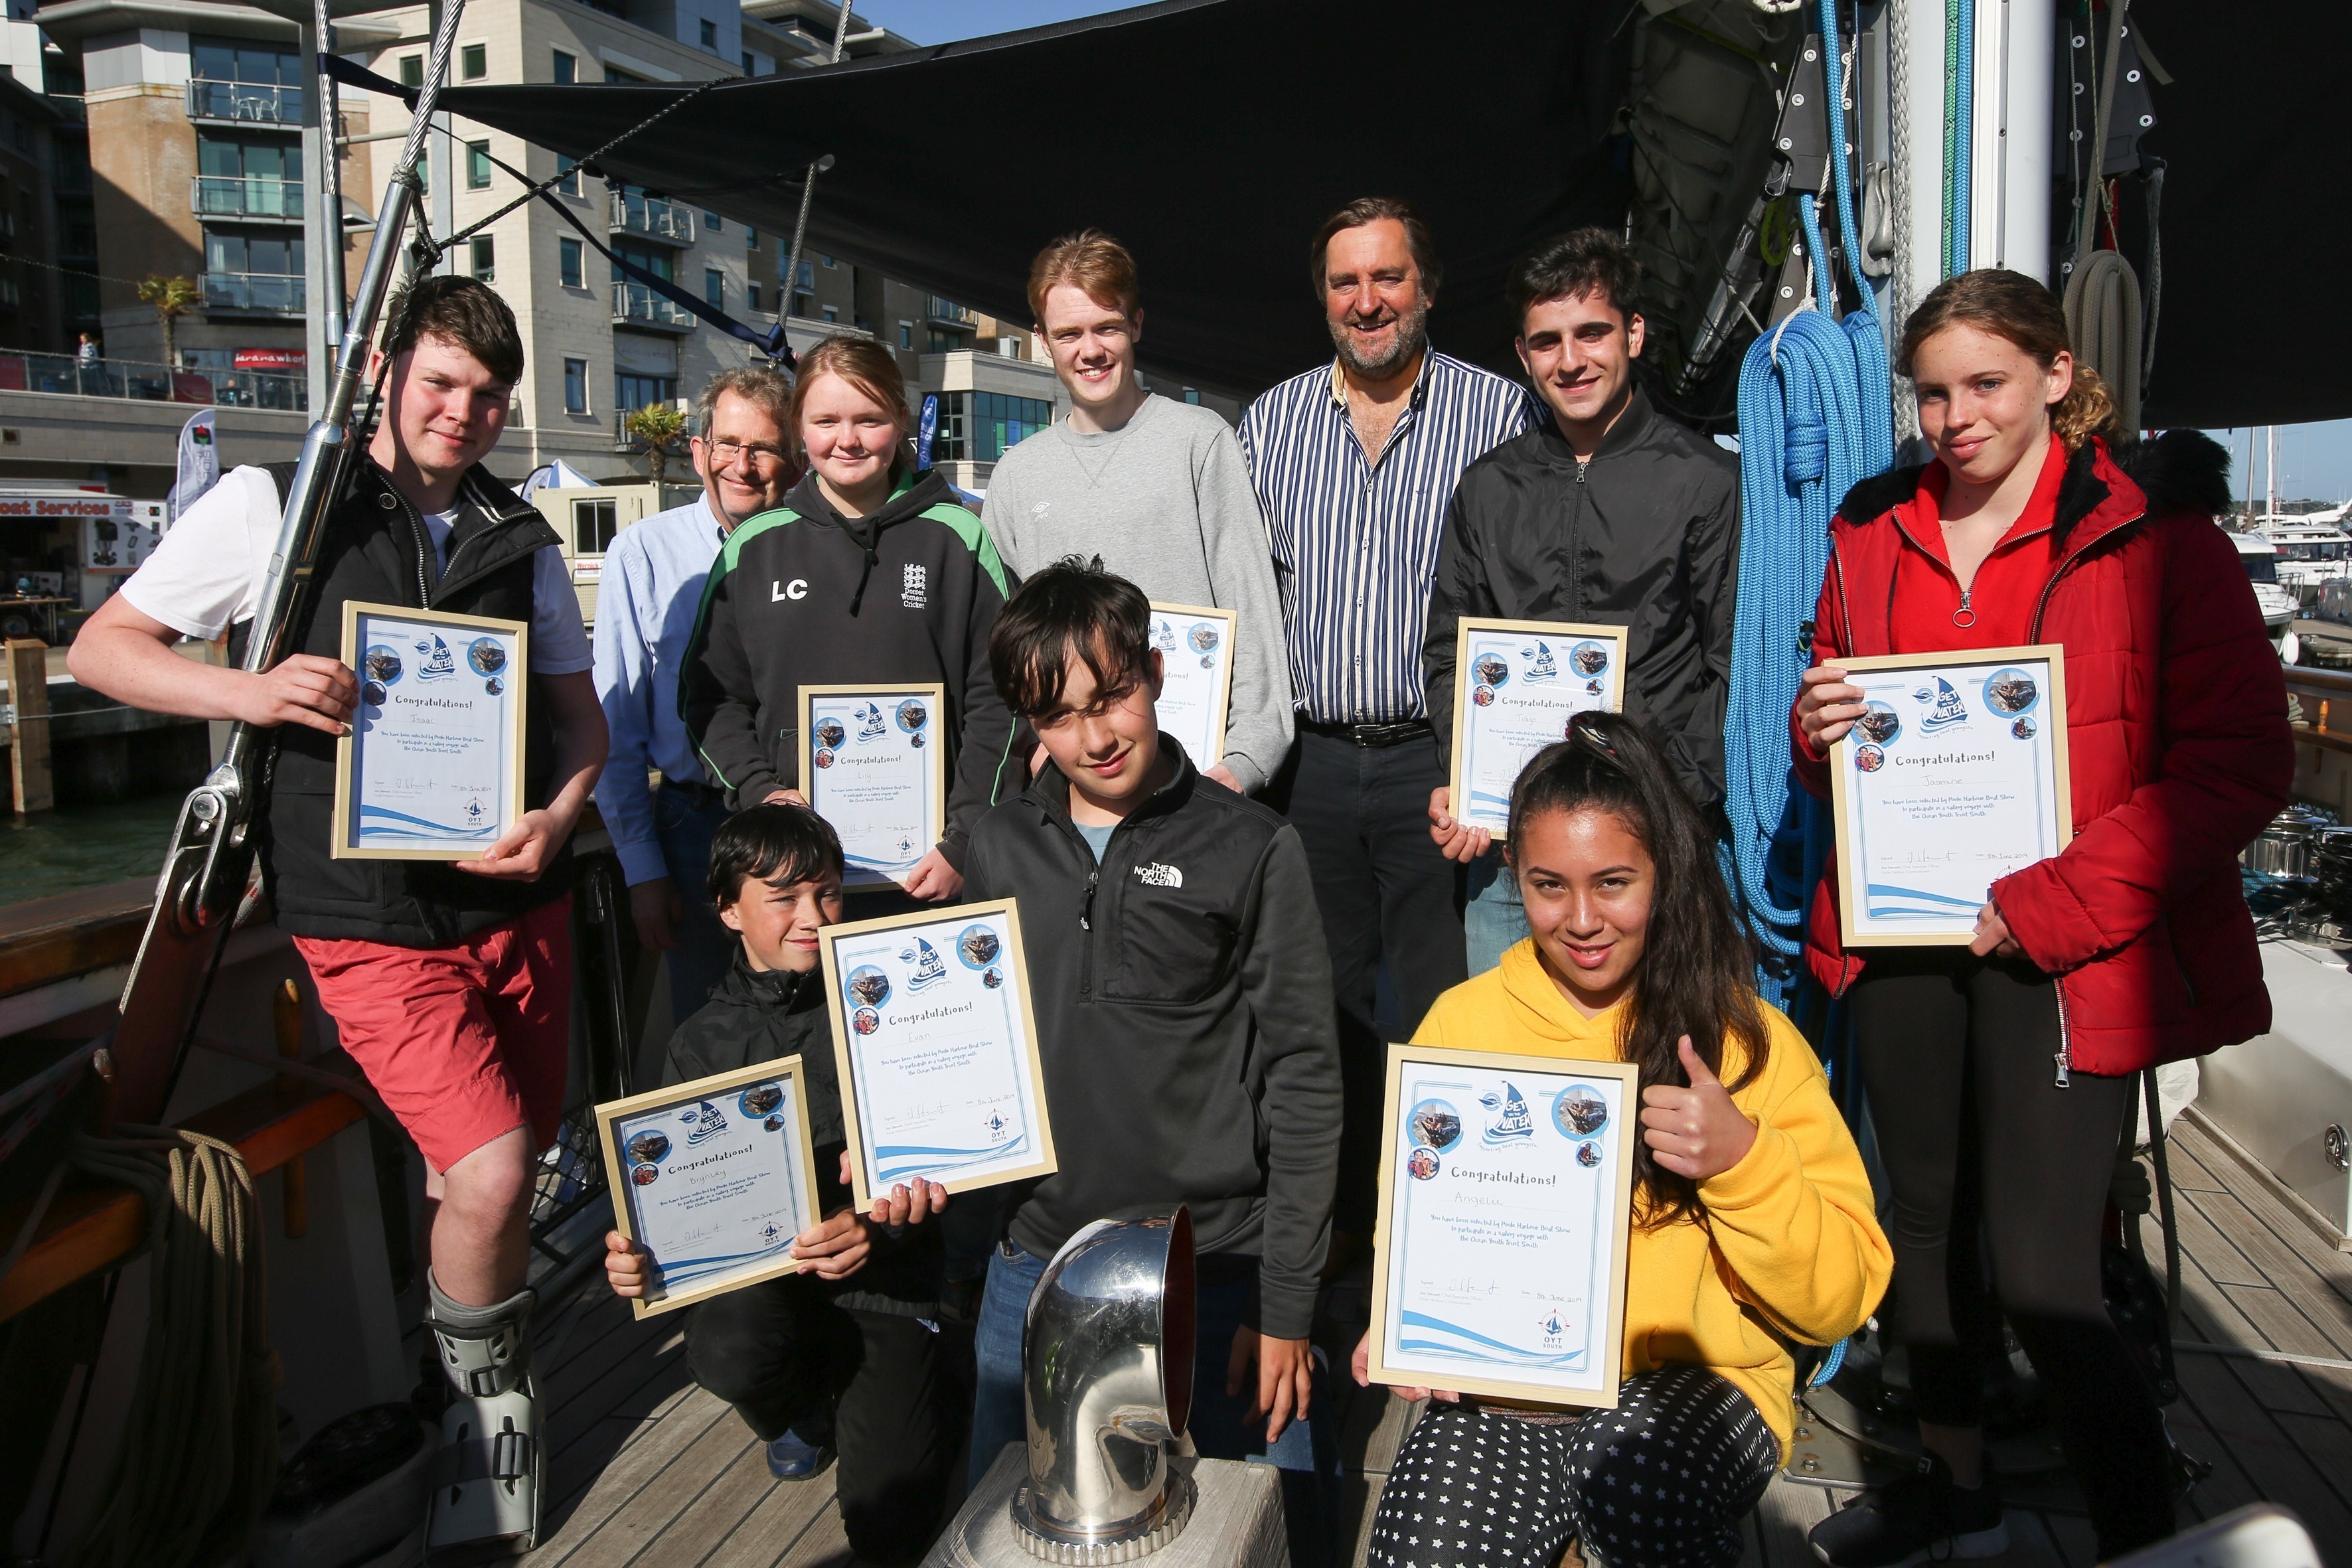 18 Dorset youngsters set sail thanks to Poole Harbour Boat Show